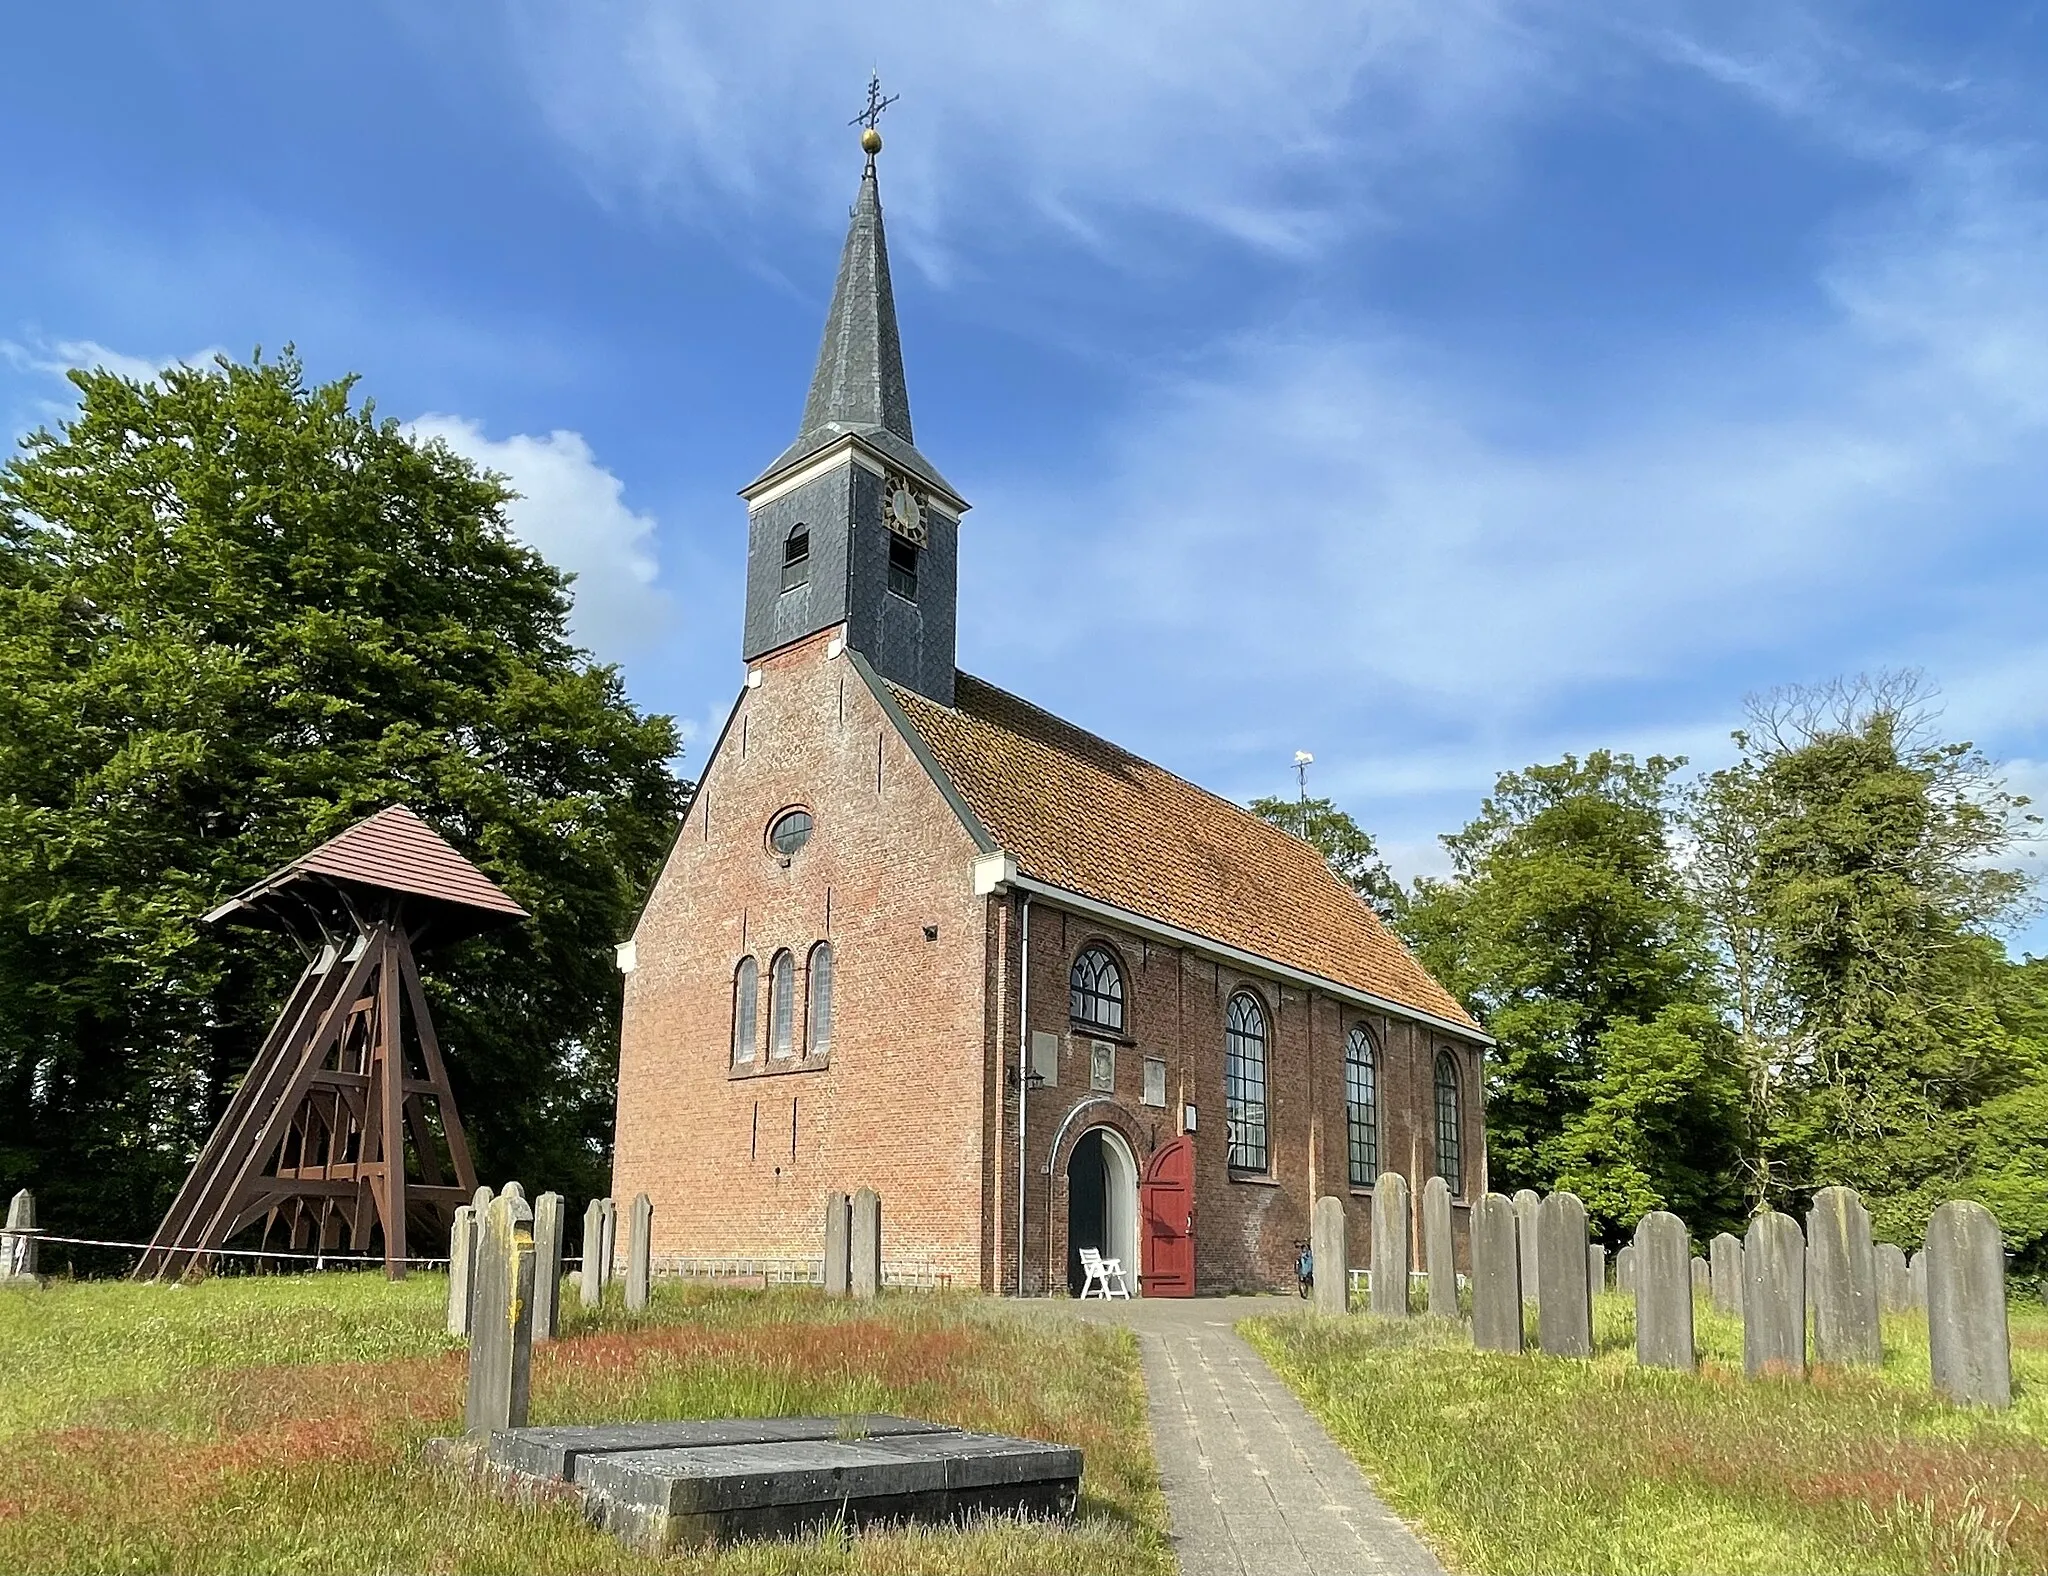 Photo showing: The village church (1735) with separate bell tower in Oosterwolde (Friesland, Netherlands).